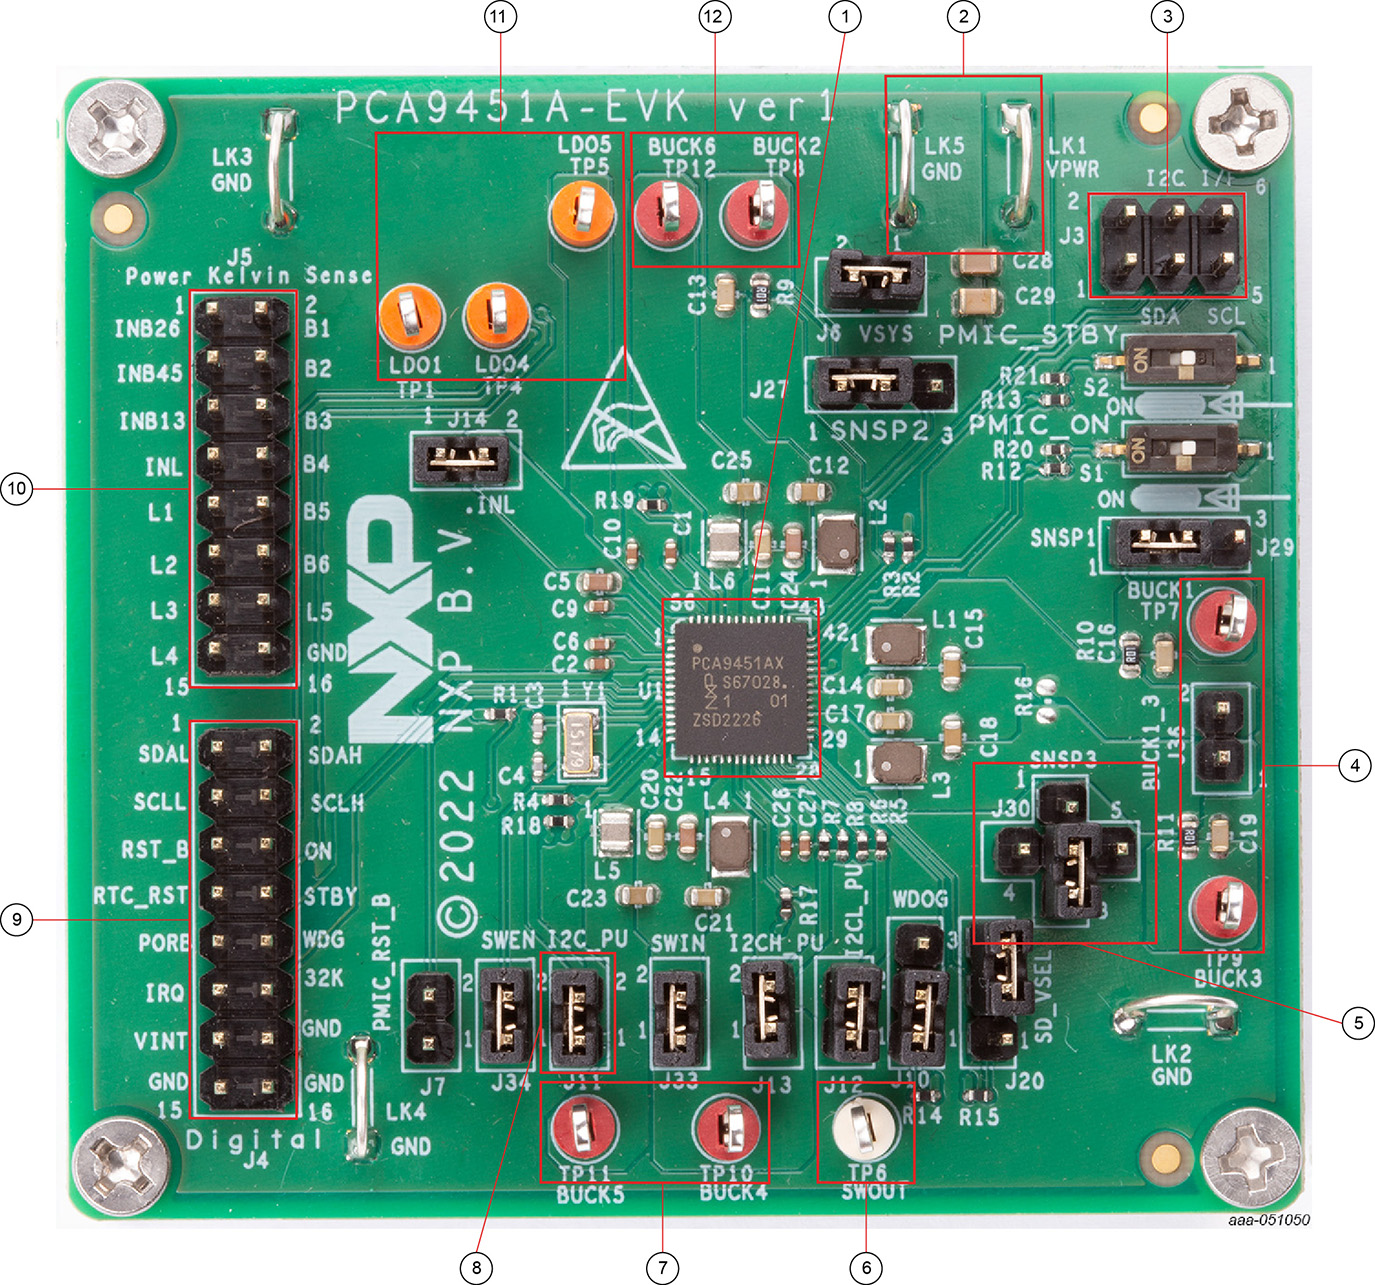 PCA9451A-EVK Evaluation Board Featured Component Locations